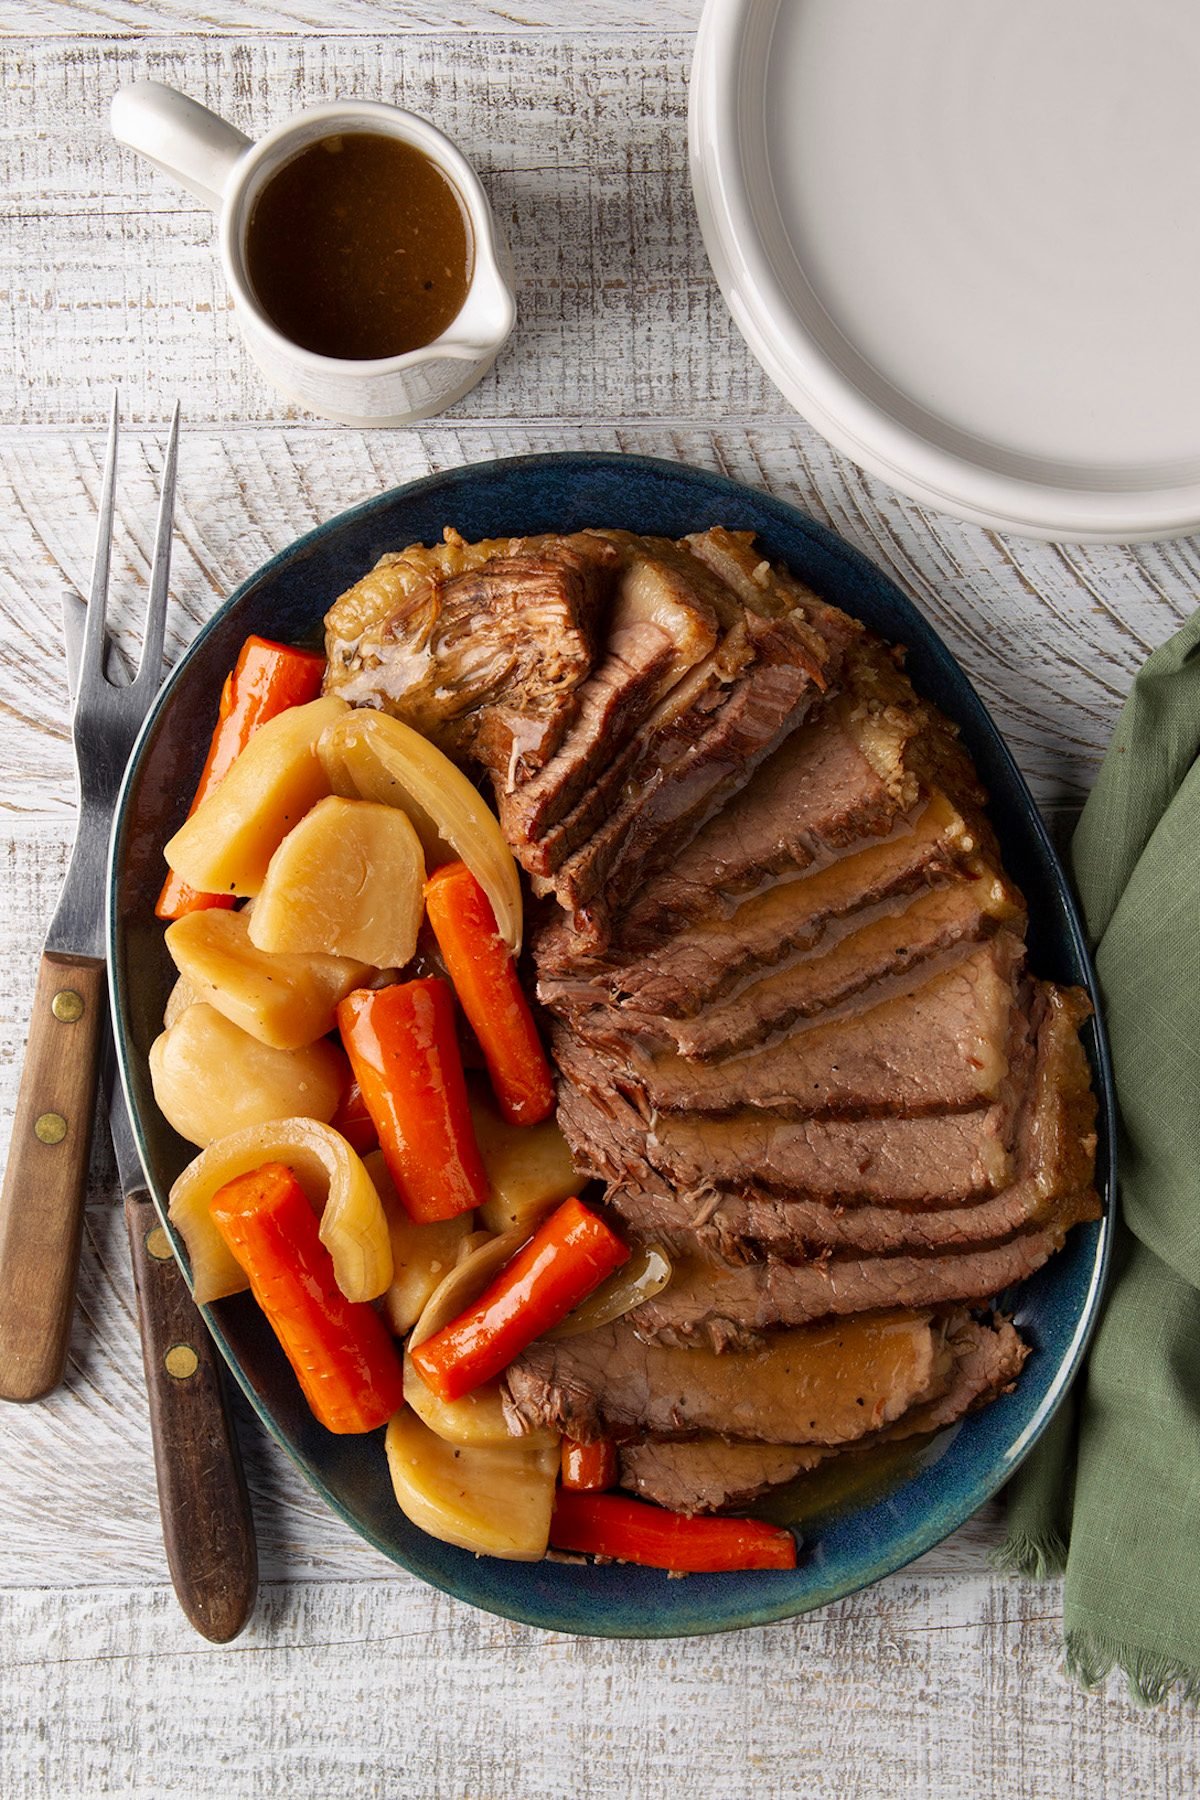  This Easy Pot Roast Crockpot Recipe Will Melt in Your Mouth